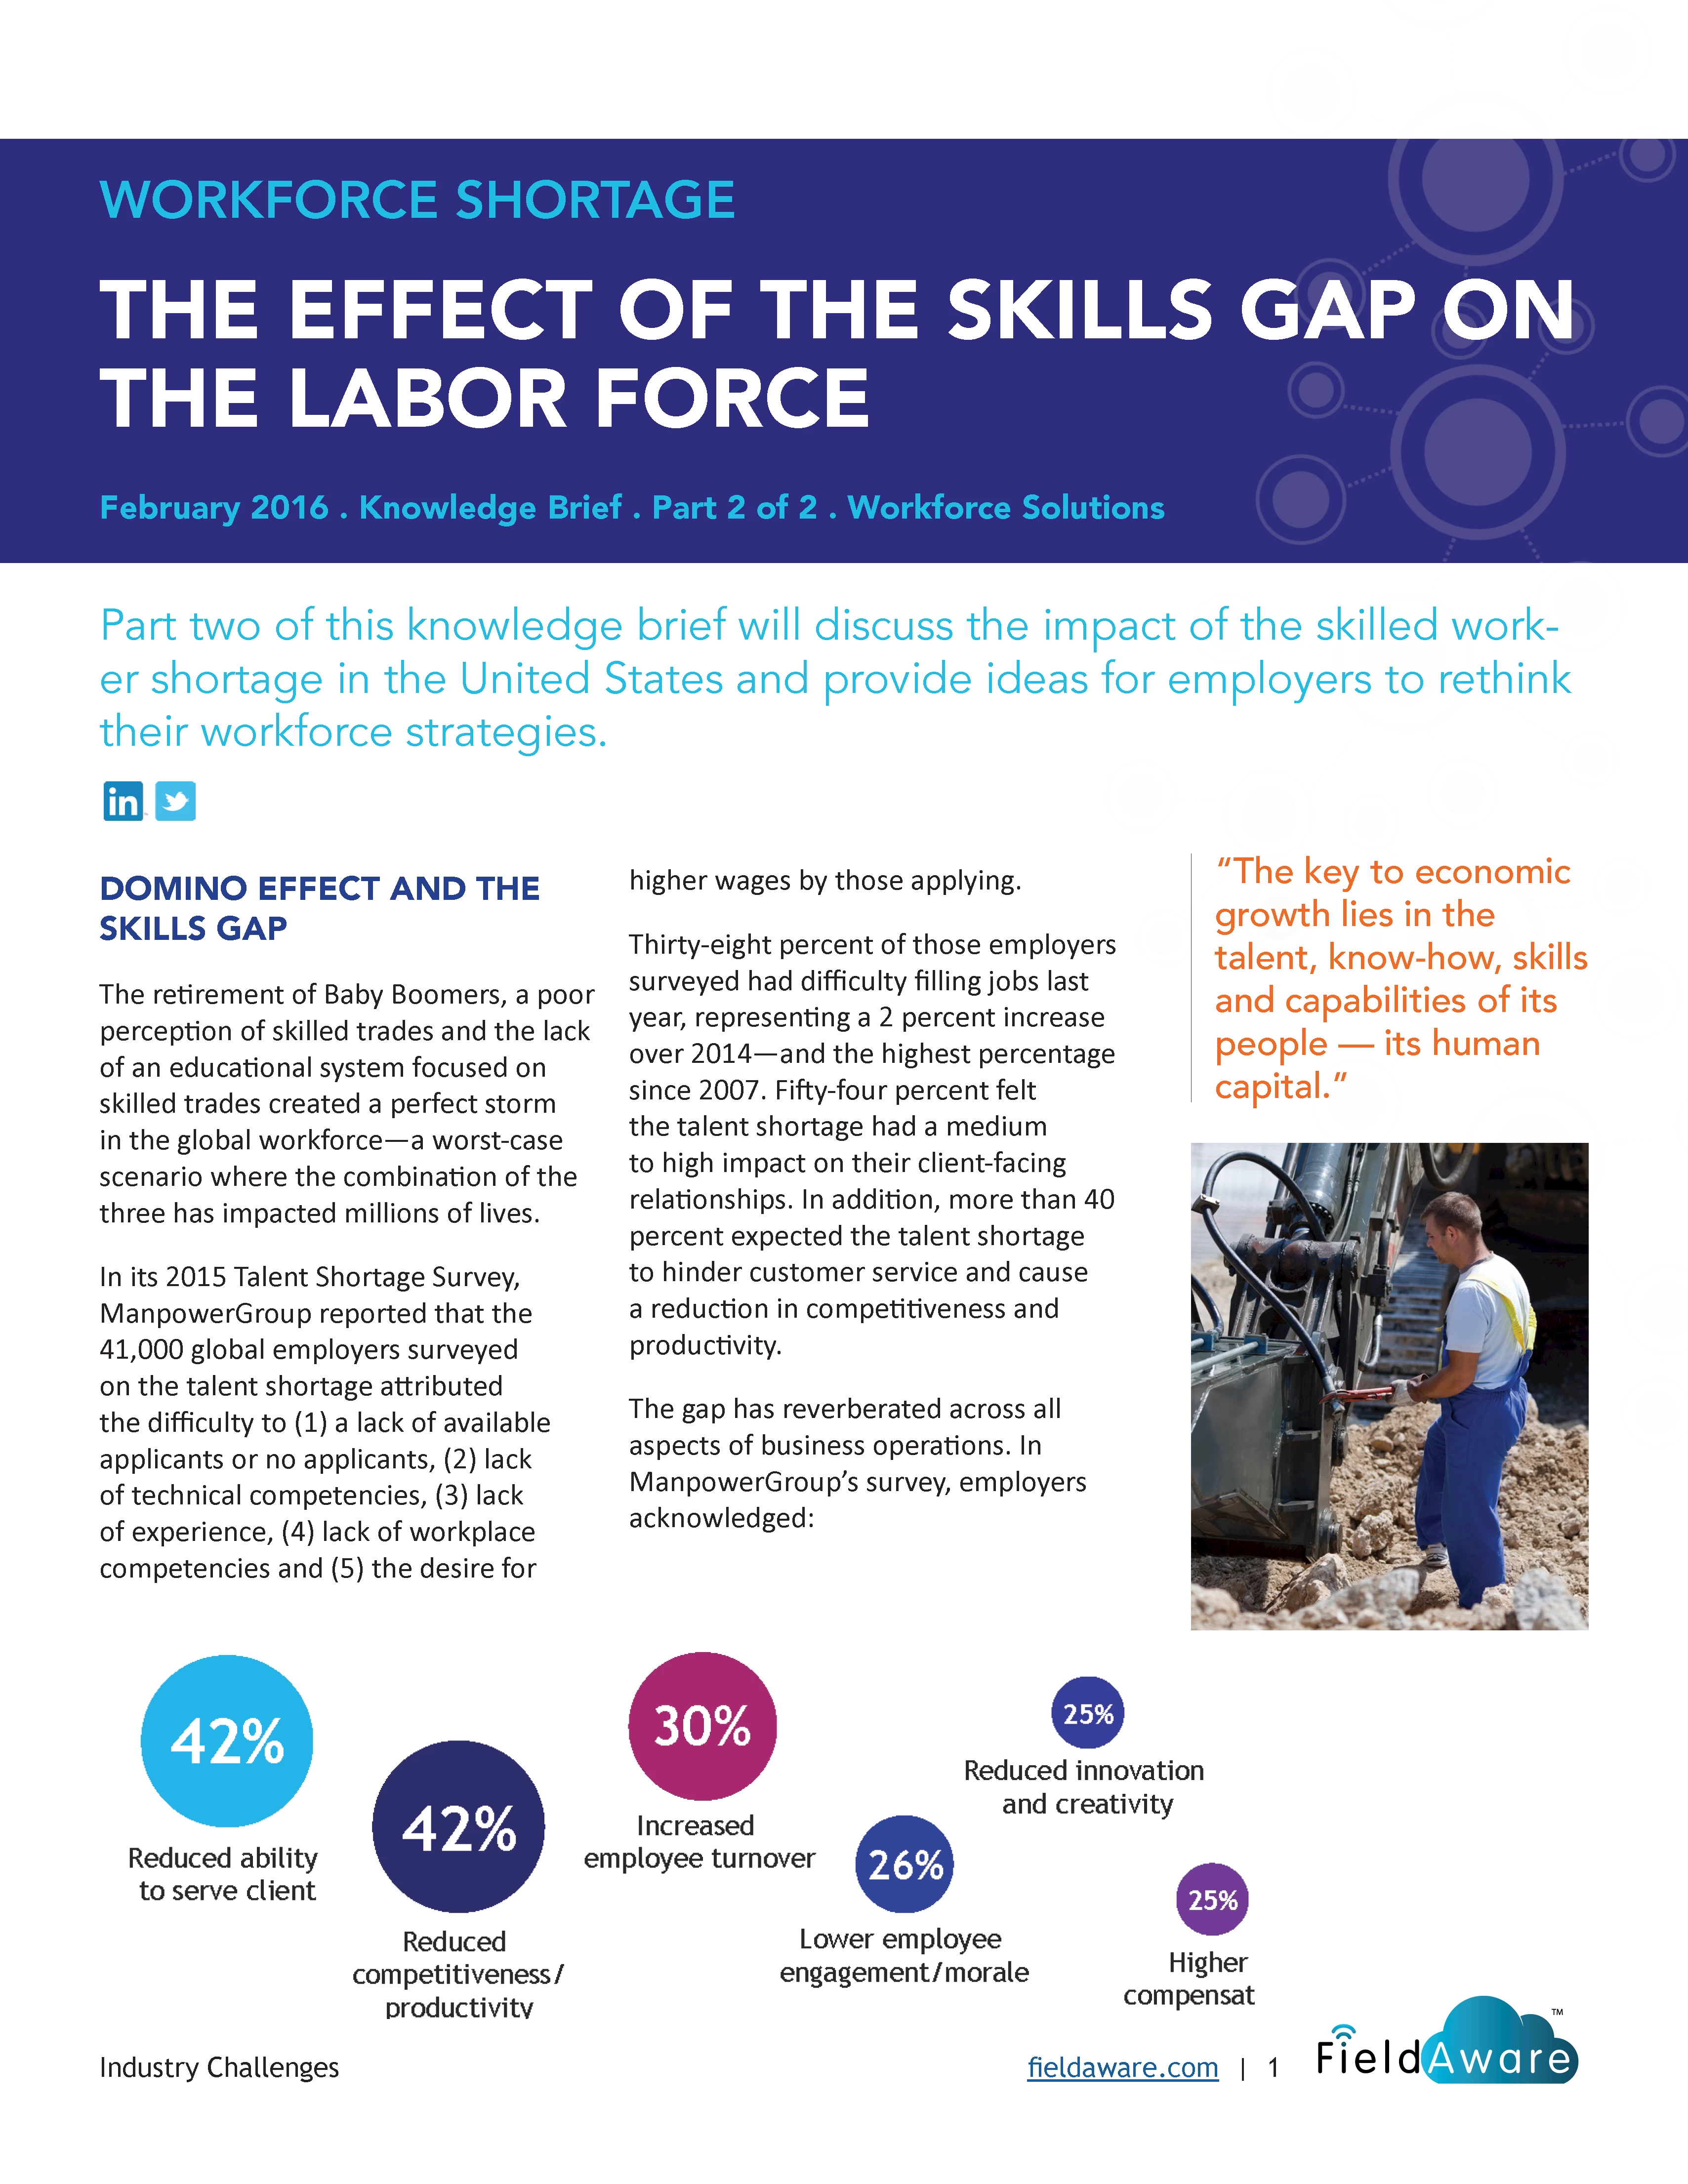 Workforce Shortage The Effect Of The Skills Gap On The Labor Force - Part 2 White Paper